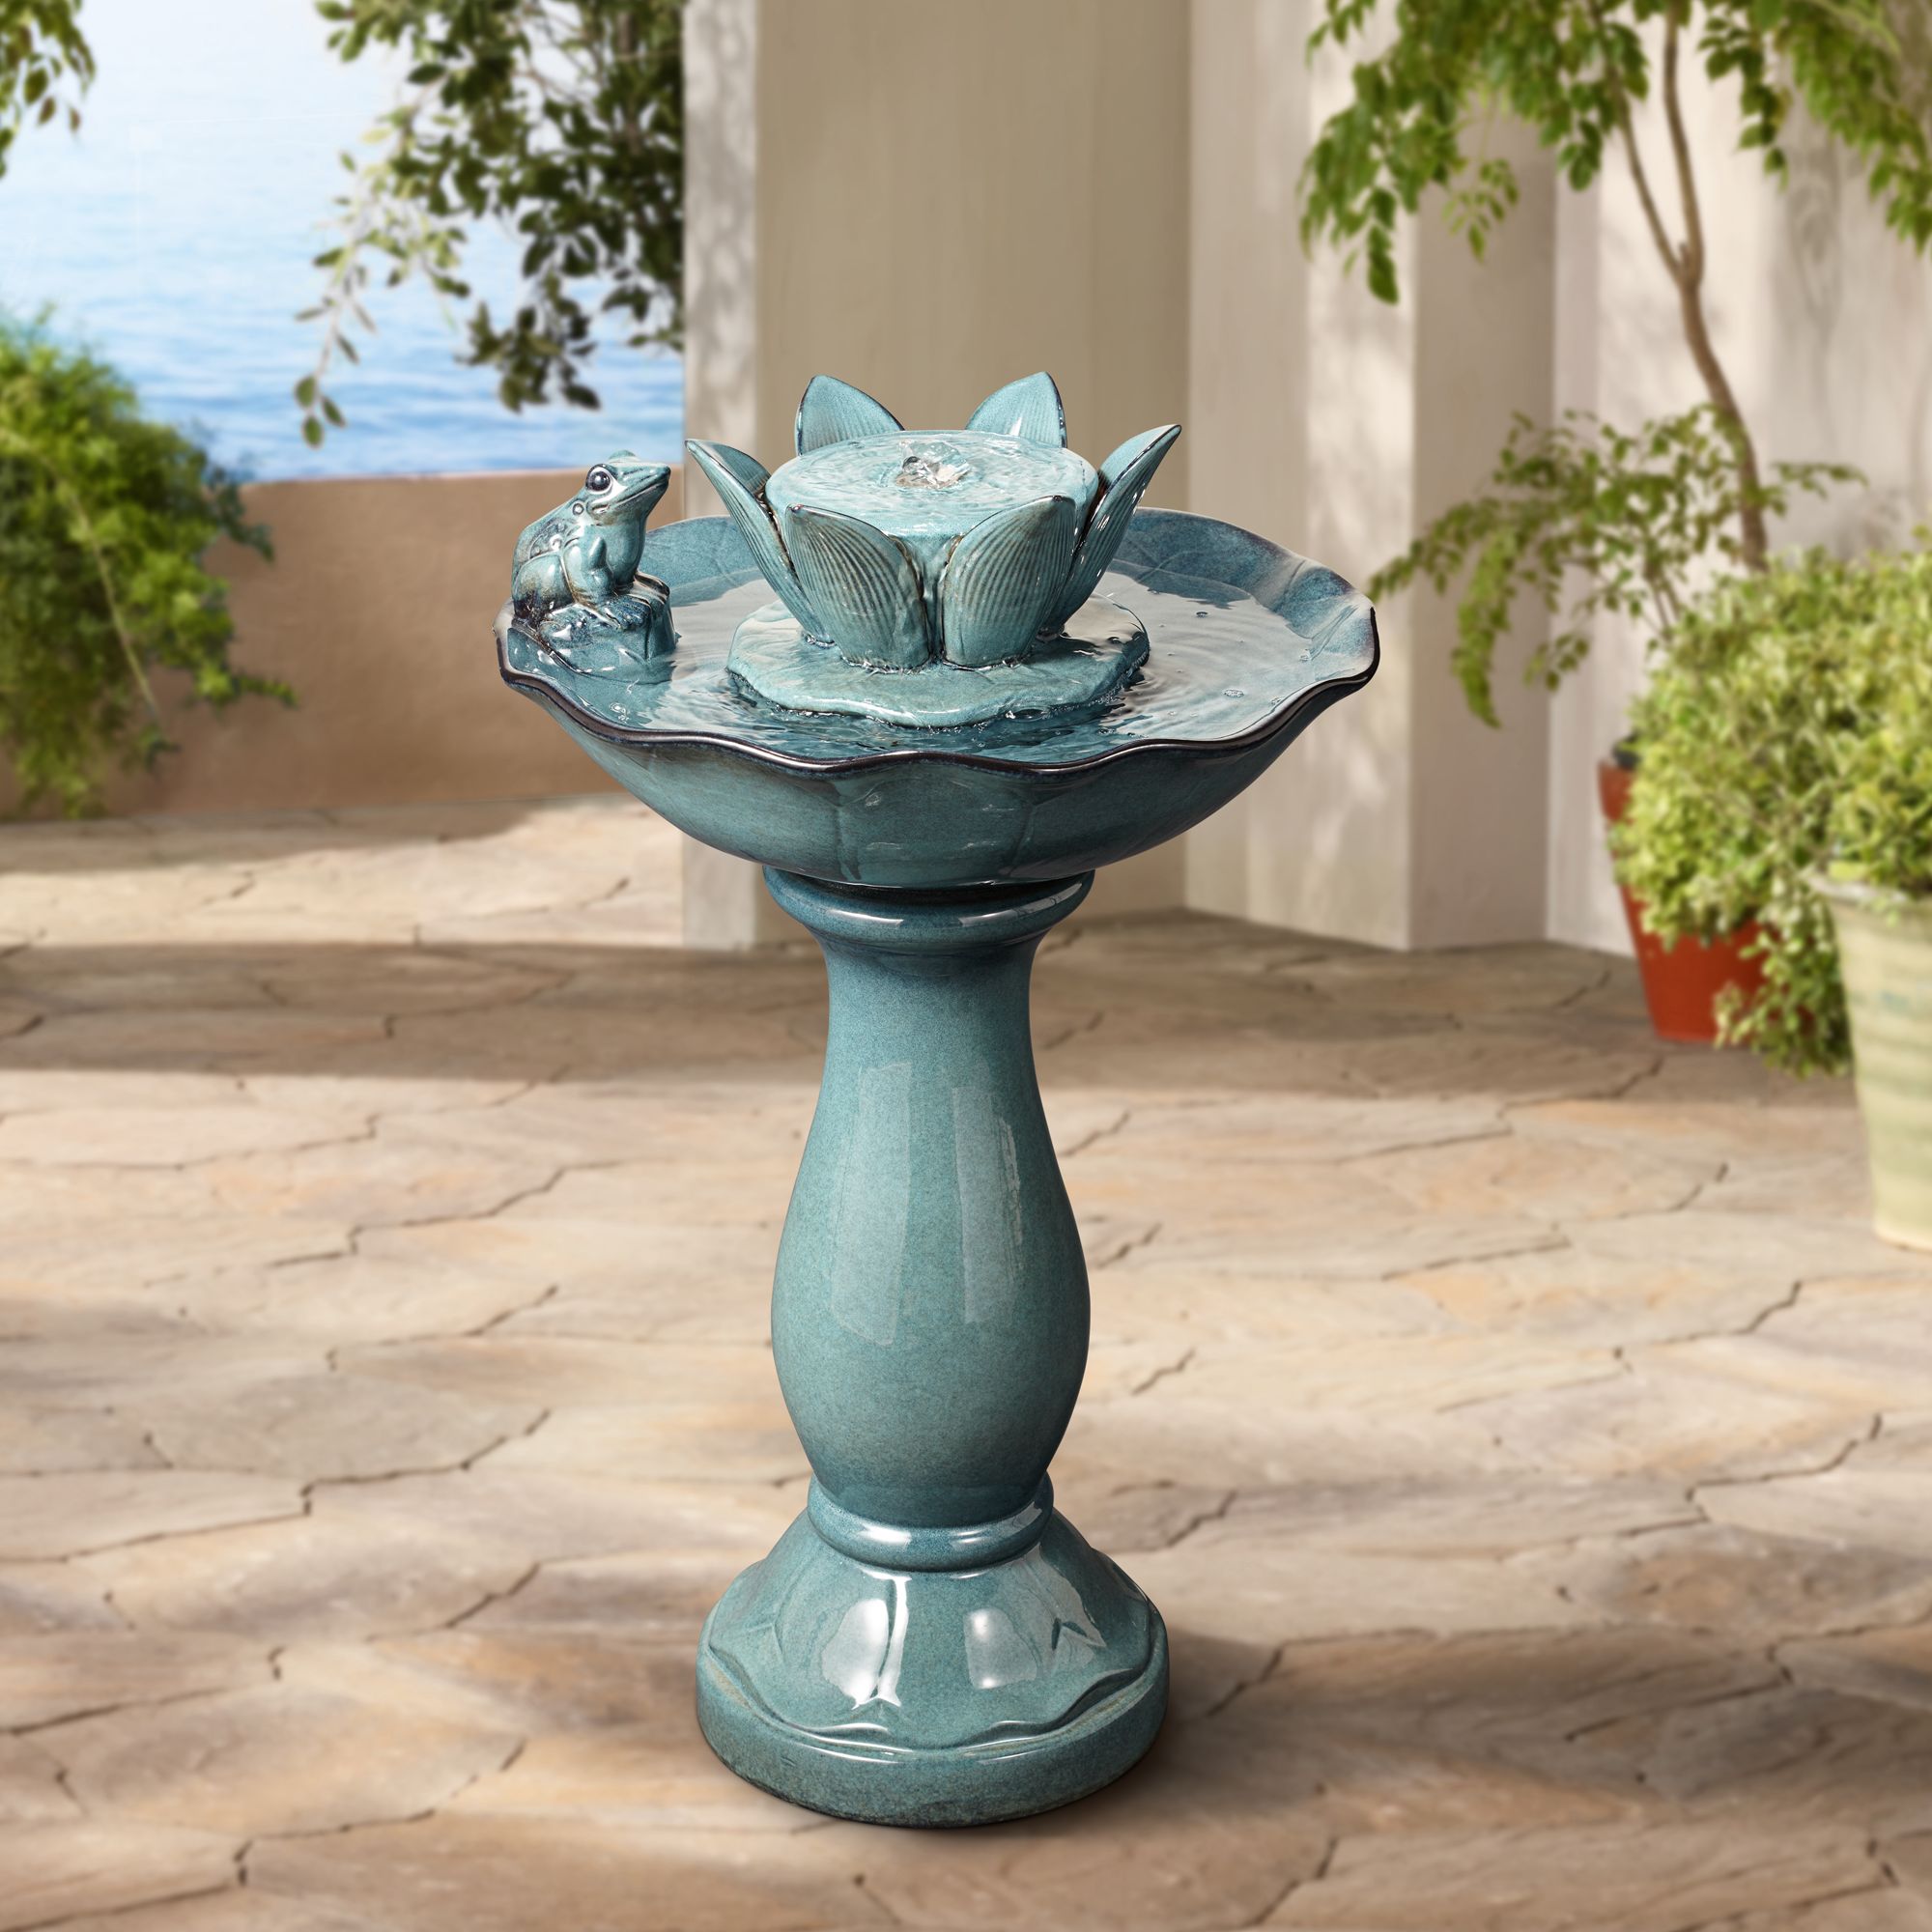 John Timberland Pleasant Pond Modern Bubbler Lotus Flower Outdoor Floor Water Fountain 25 1/4" for Yard Garden Patio Deck Porch House Exterior - image 1 of 9